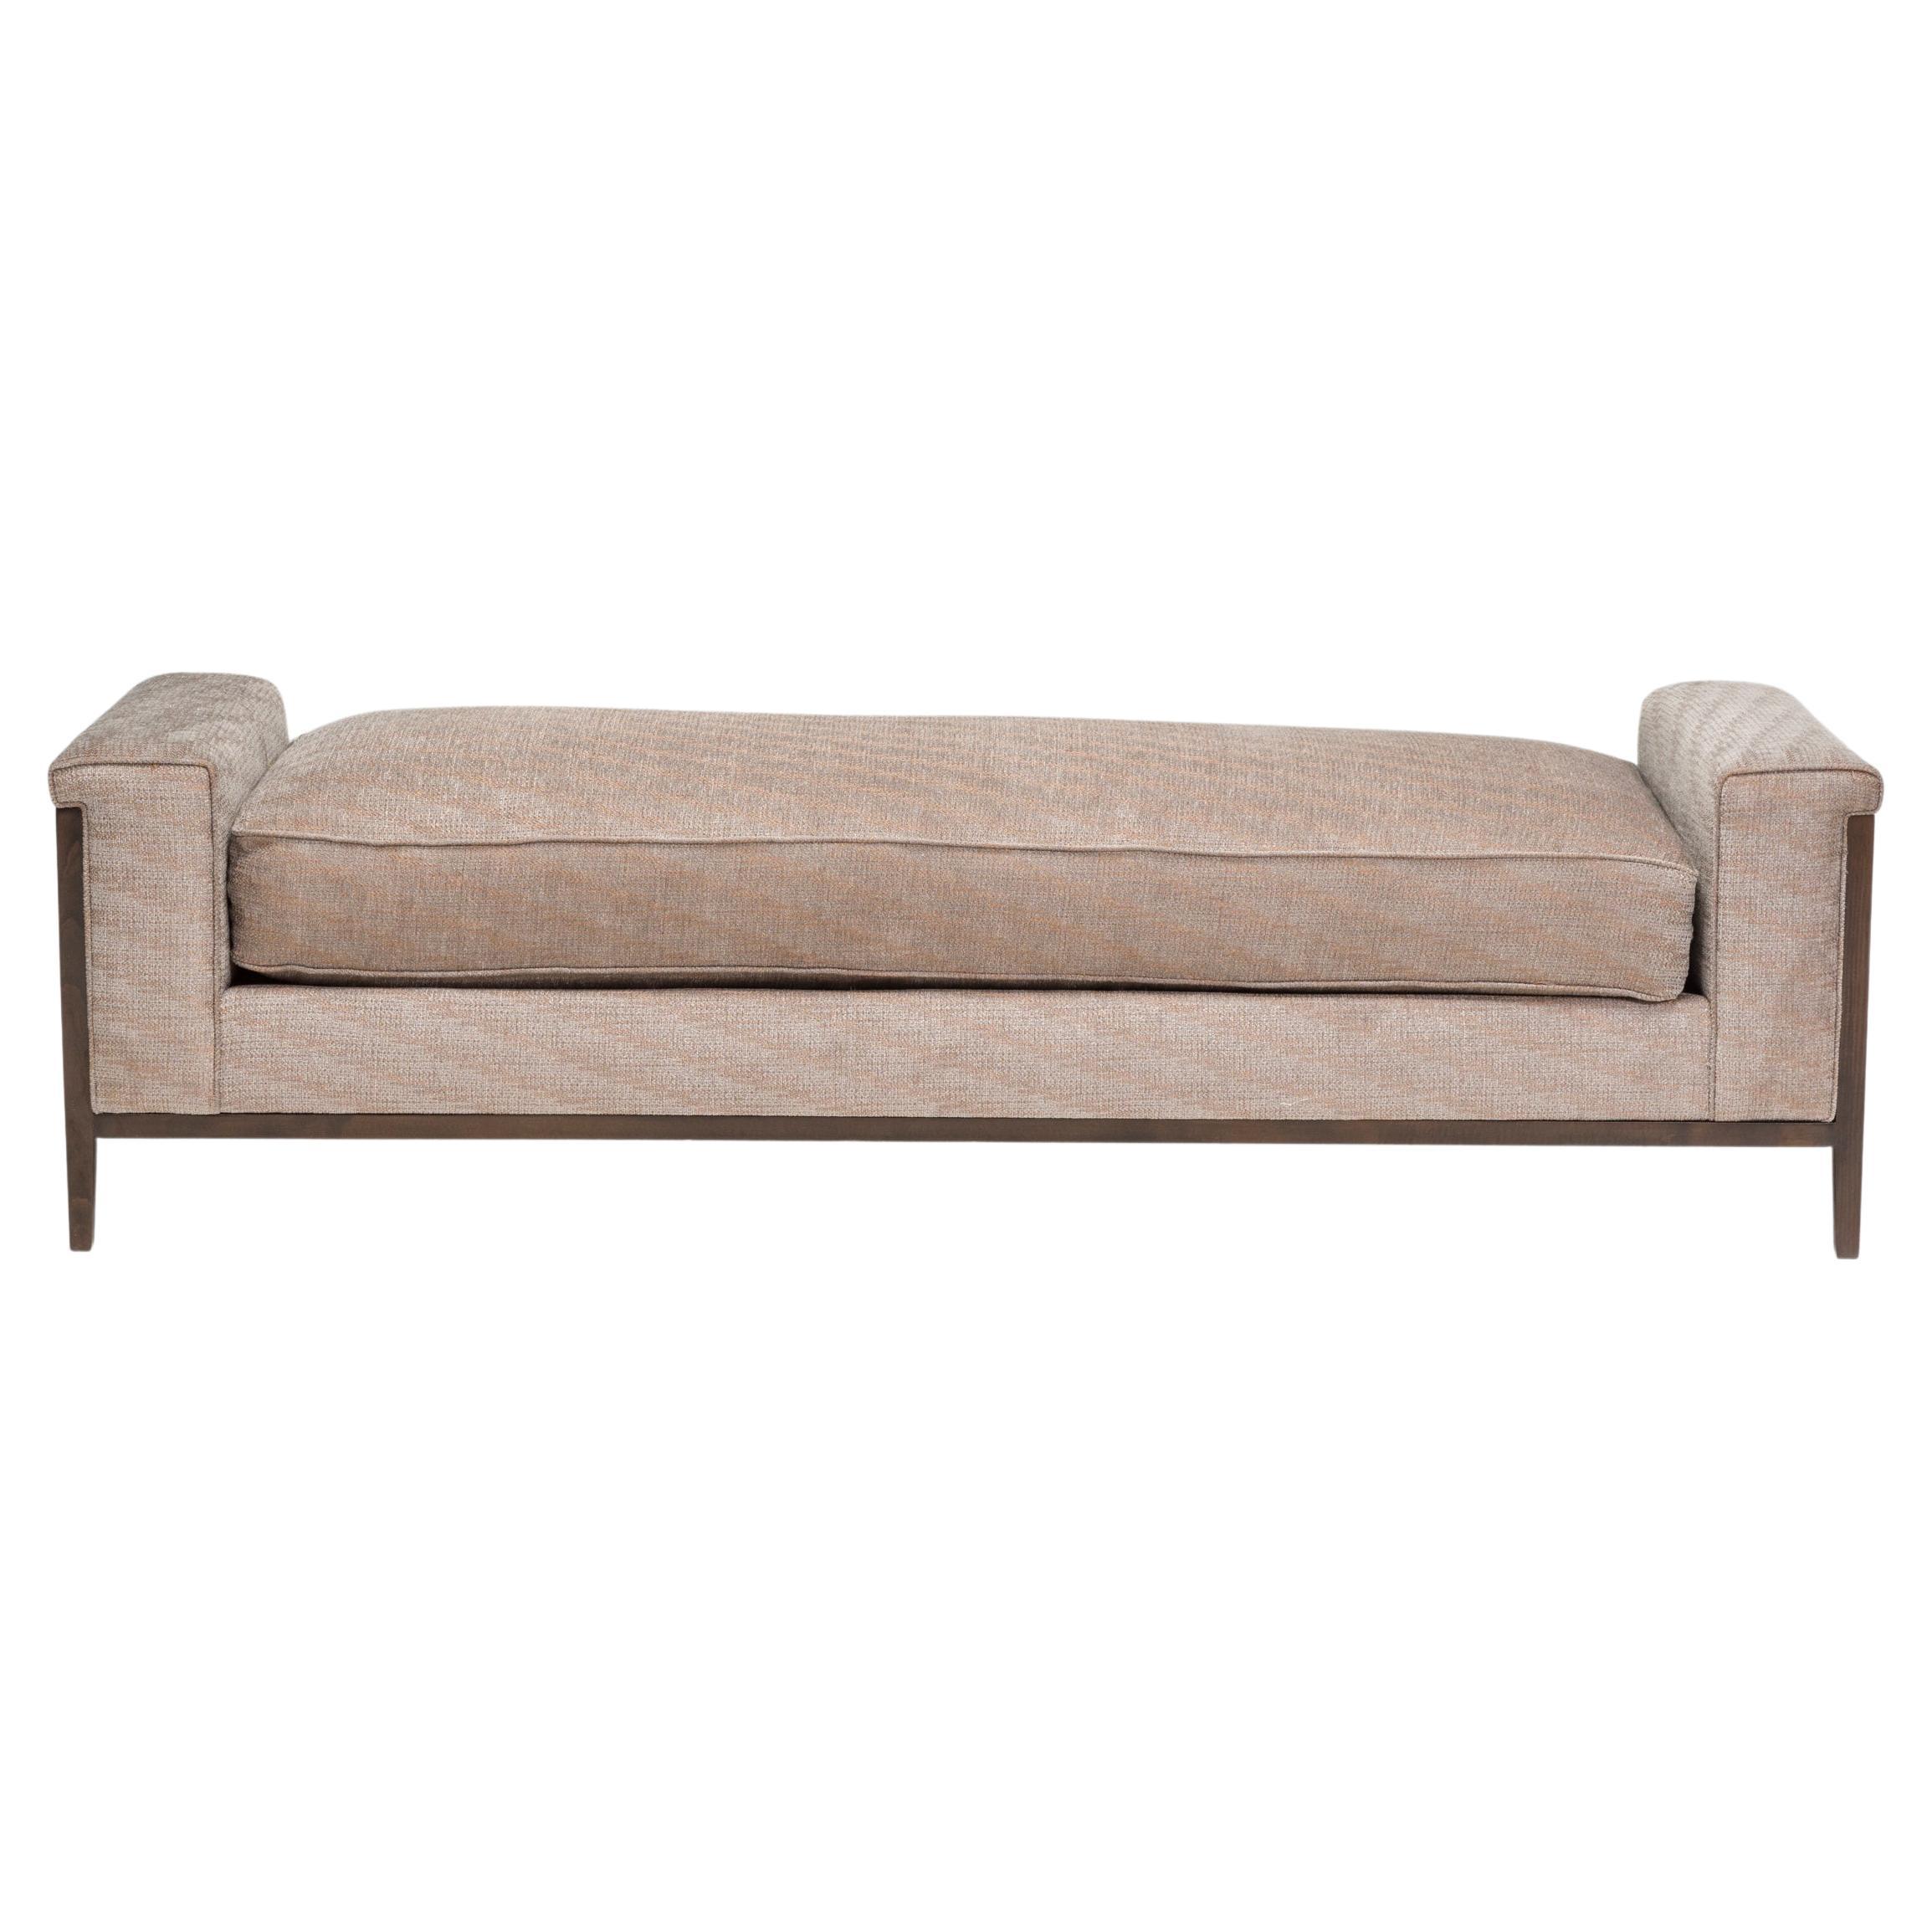 Grey Upholstered Bench with Carved Wooden Frame